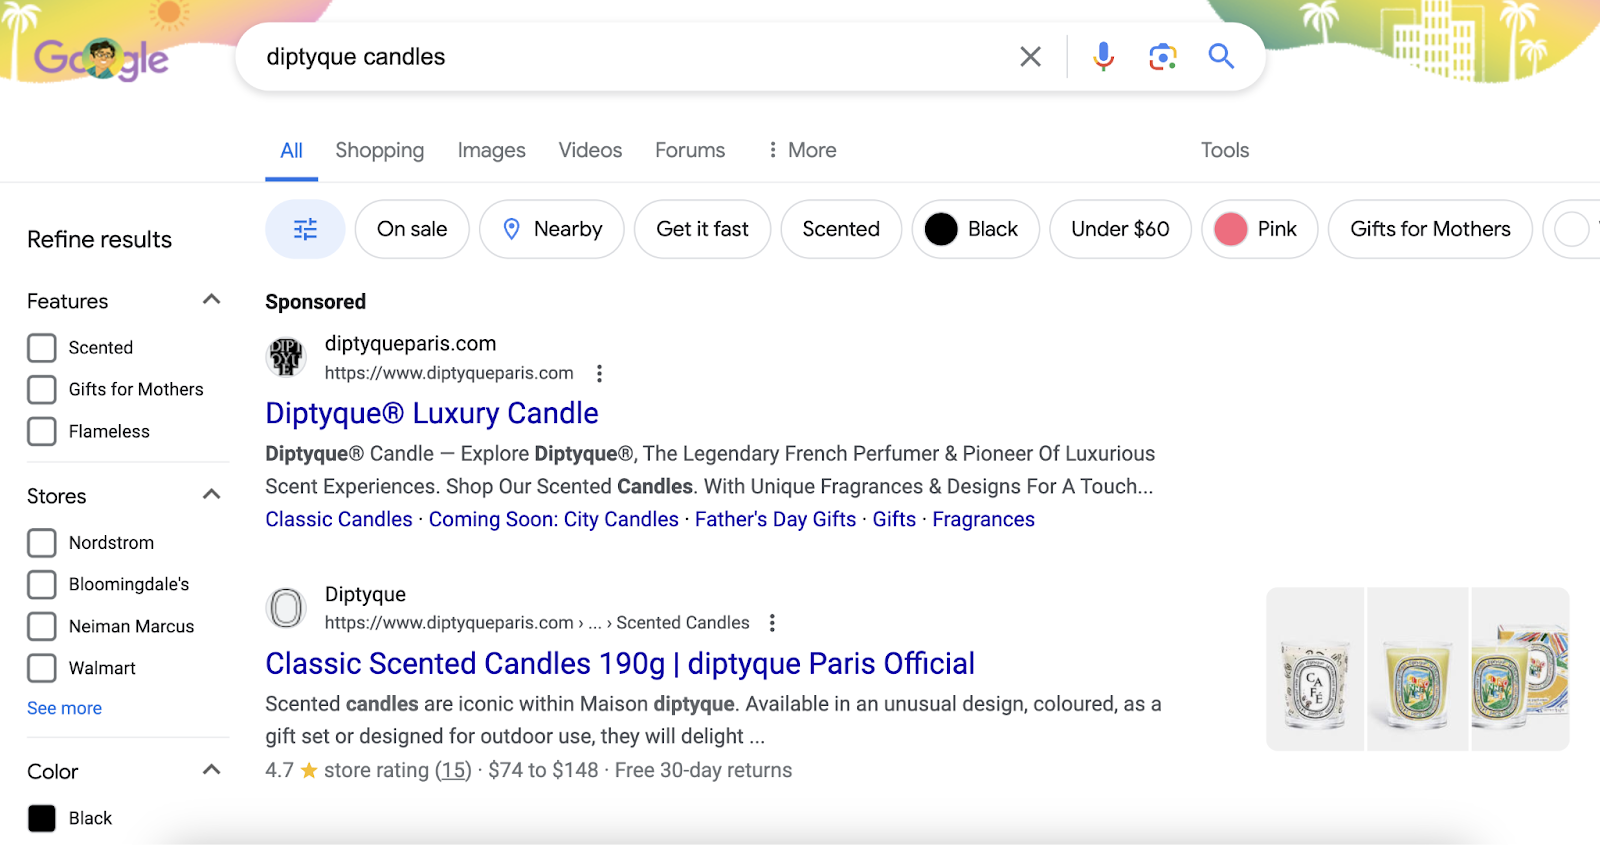 search for "diptyque candles" shows a paid search result and an organic result from the same brand